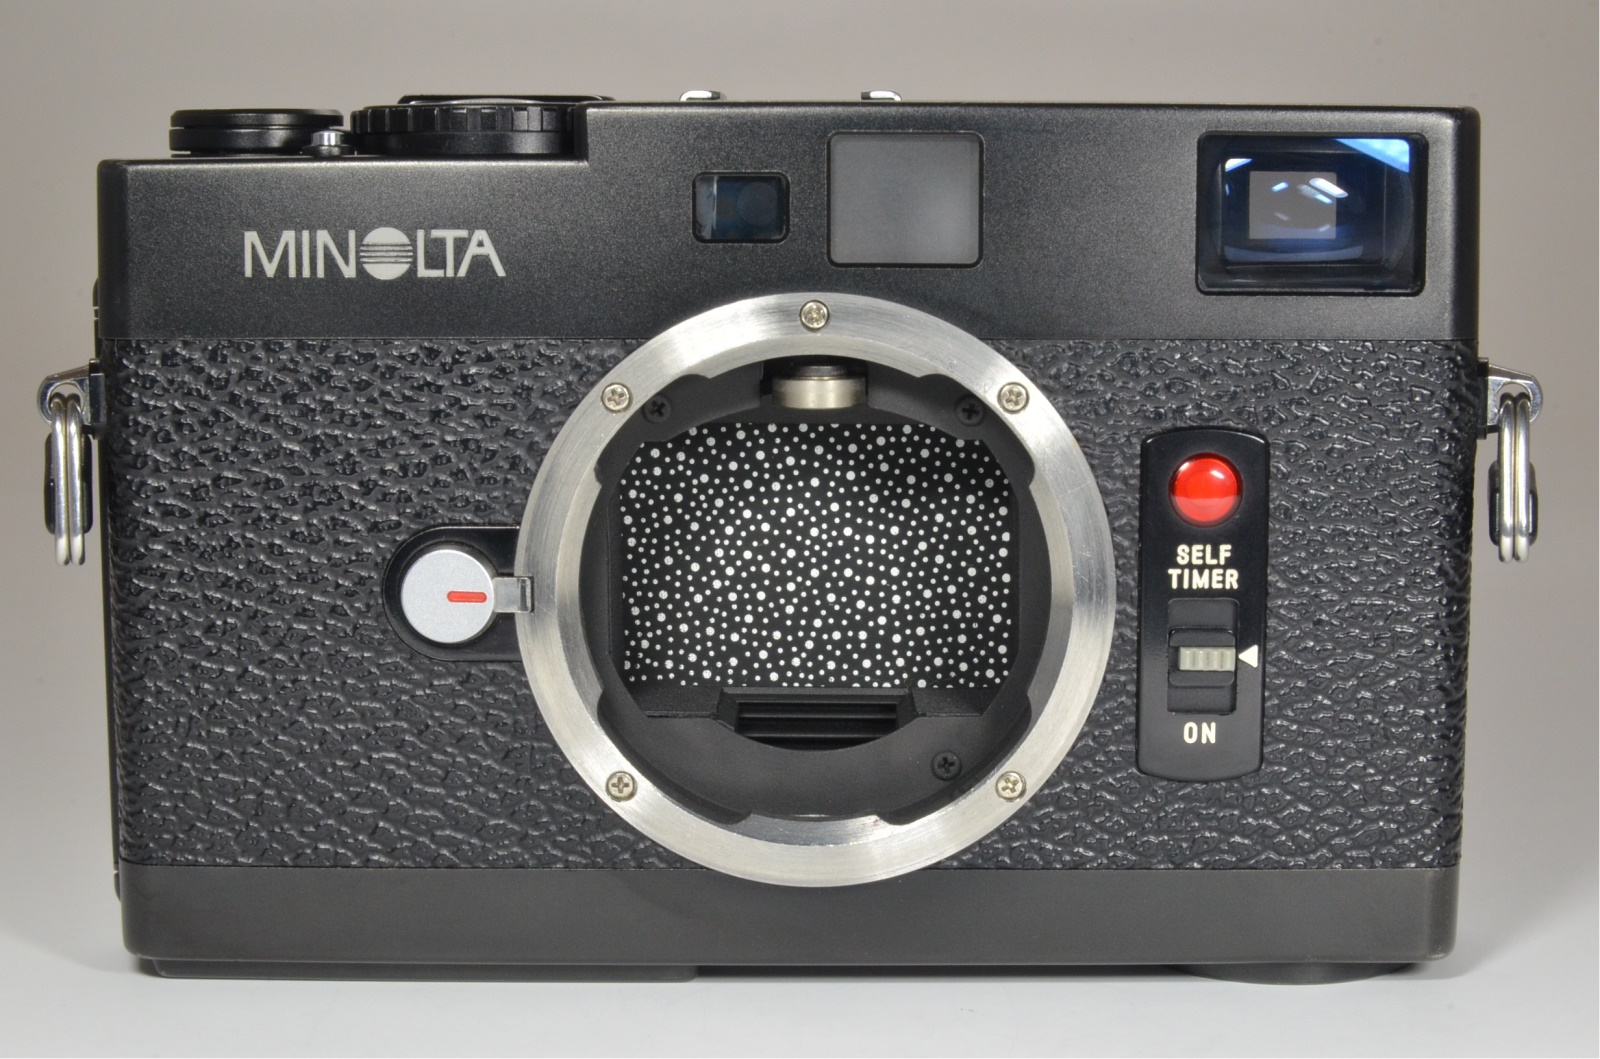 minolta cle 35mm film camera with lens m-rokkor 40mm f2, 90mm f4 and 28mm f2.8